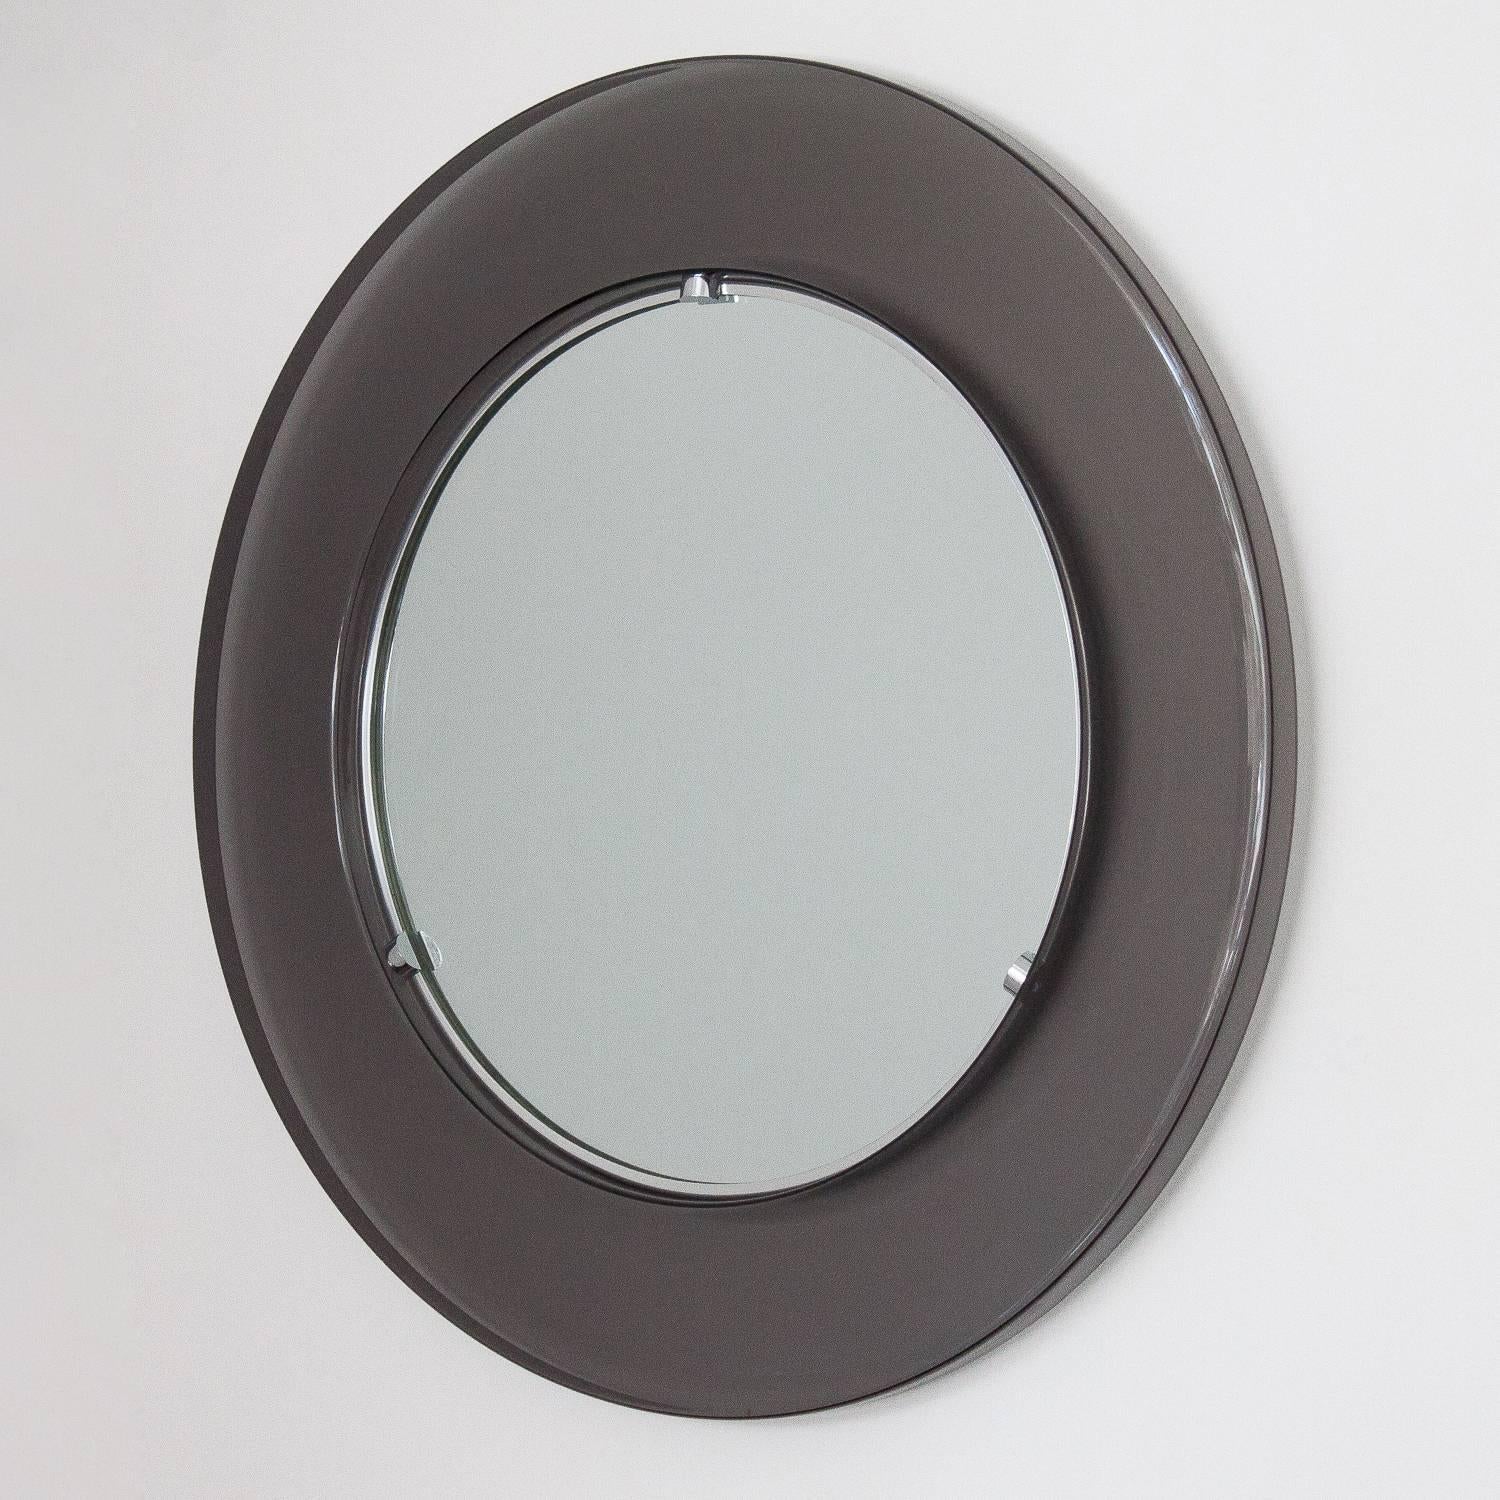 Stunning 1970s, smoke Lucite framed wall mirror. Reminiscent of glass framed mirrors by Fontana Arte. Measures: 3.75" tinted molded translucent acrylic frame with 15.5" round inset mirror. Chrome hardware. Unmarked.